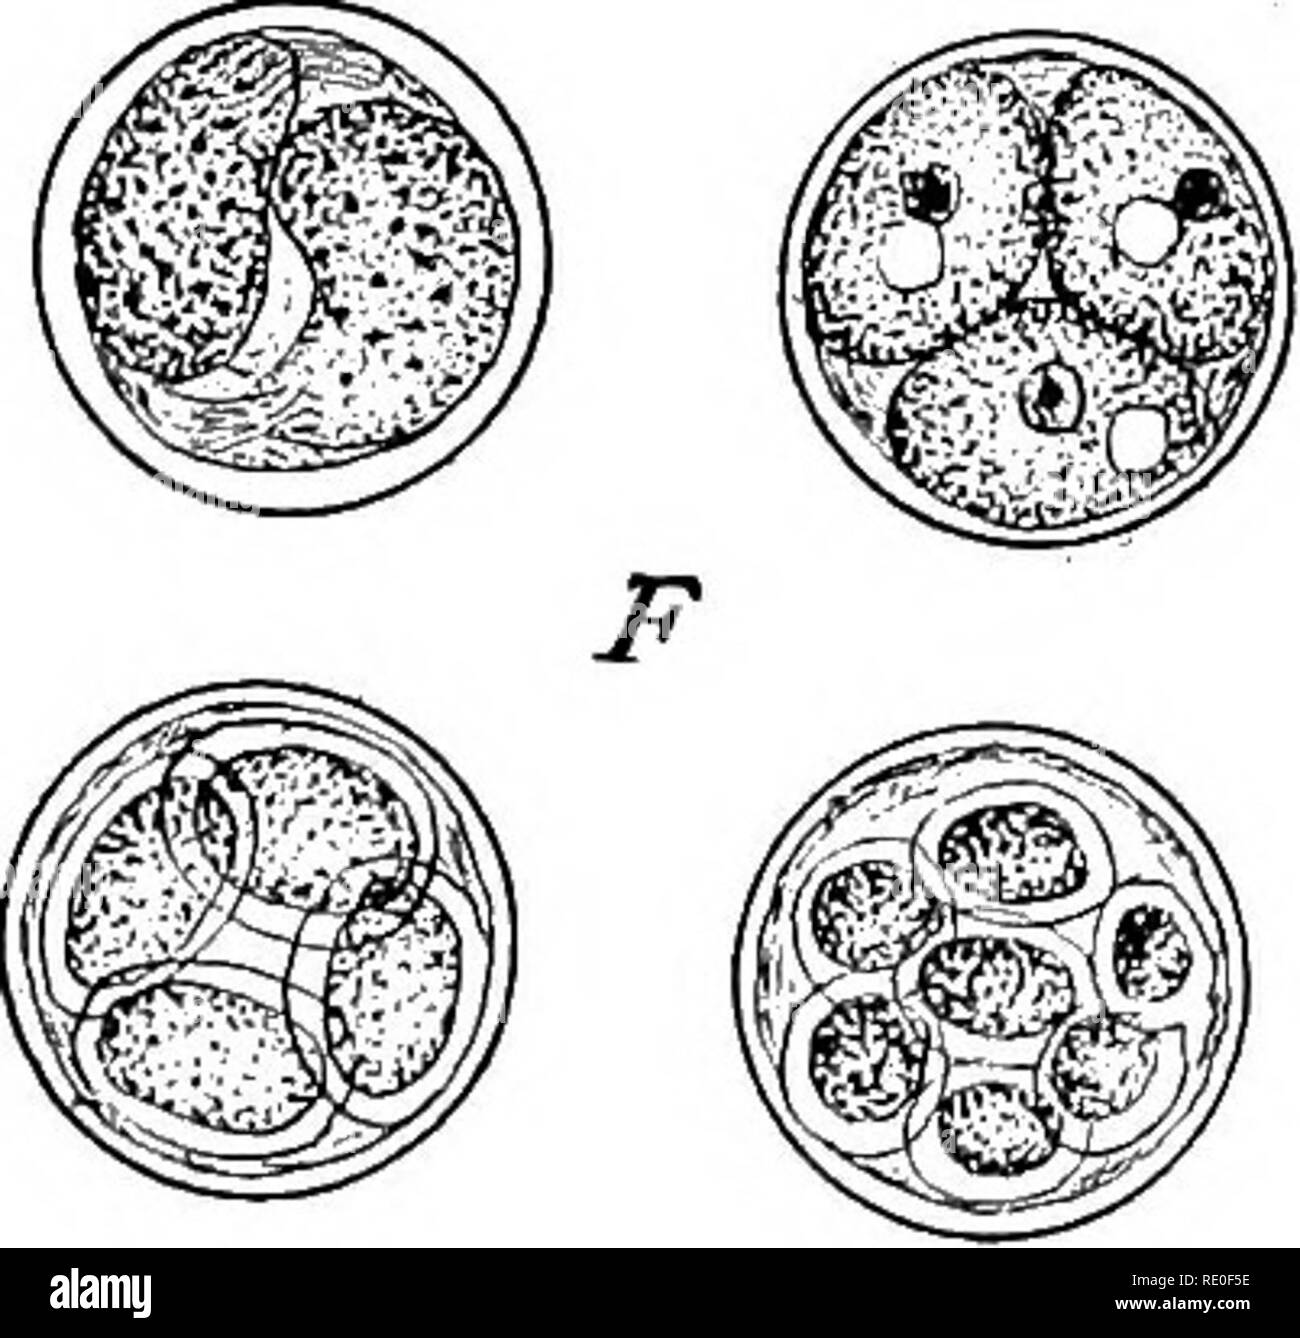 . The Protozoa. Protozoa. Fig. 17. — Types of cysts. A. Amasba proteus. [SCHEEL.] B. Stylonychia mytilus Ehr. [BiJTSCHLI.] C. Pleurotricha grandisSt. [BUTSCHLI.] D. Euglypha alveo/aiaDuj. [Leidy.] E. Actinospharium EicA.War. [BUTSCHLI.] F. Colpoda Steinu. [MAUPAS.] a, gelatinous matrix; i, outer cyst wall; c, middle cyst wall; d, inner cyst wall. the cell draws in its appendages, rounds out into a sphere and secretes a resisting membrane, within which it can exist for a long period. When first formed, this membrane is a delicate gelatinous substance, which soon hardens and gradually acquires t Stock Photo